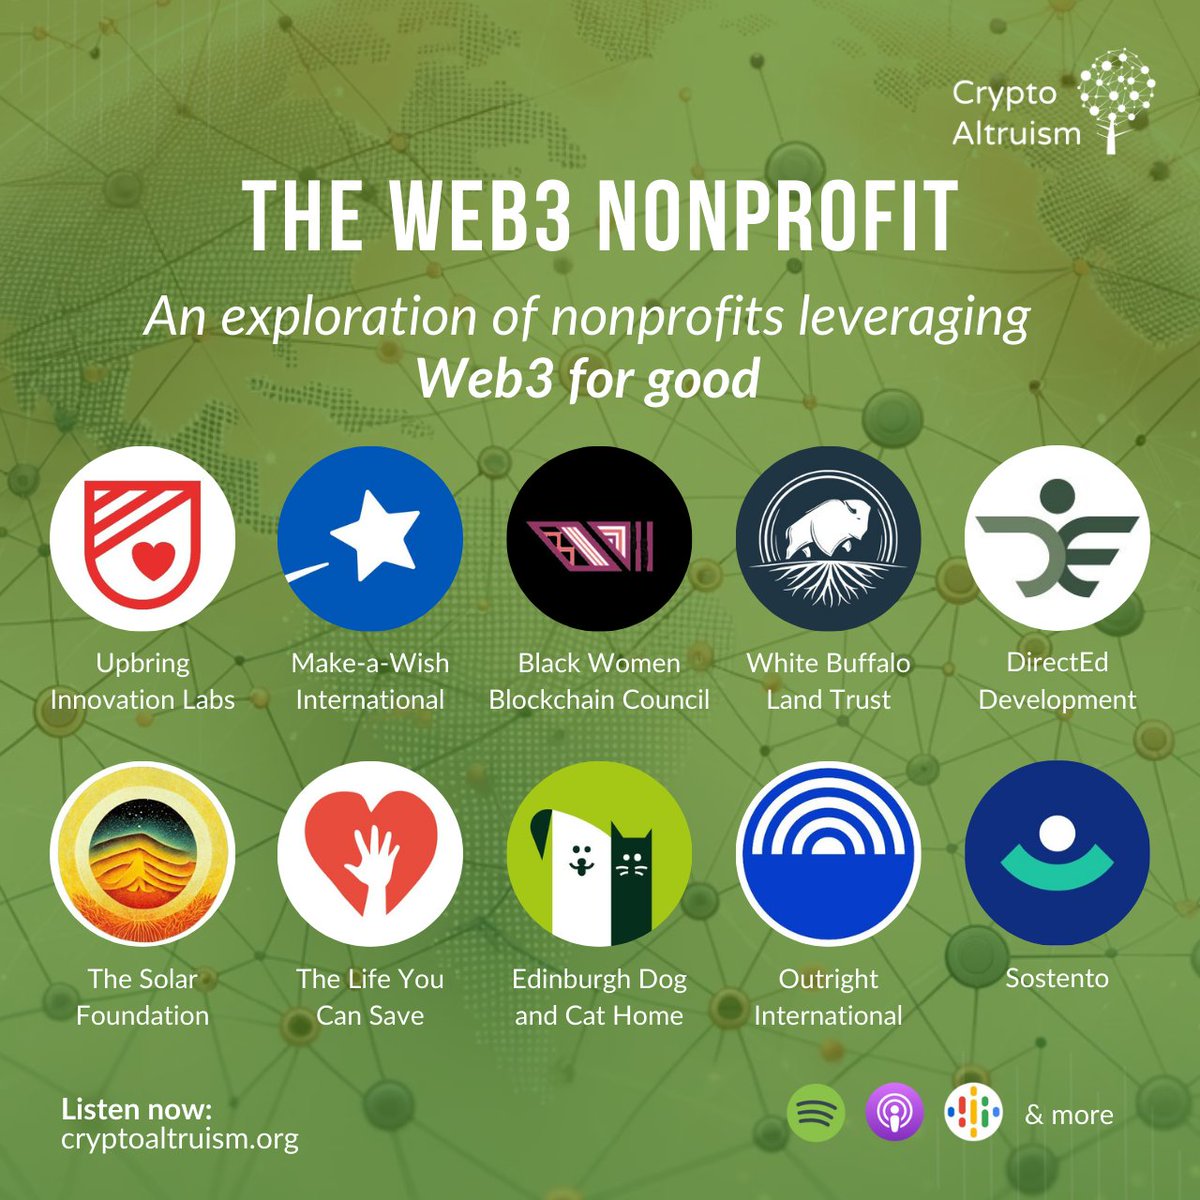 It's been an honor highlighting the work of 10 incredible & diverse nonprofits in The Web3 Nonprofit! ❤️ A big thank you to @endaomentdotorg for their partnership on the series! 🙏 👉 cryptoaltruism.org/the-web3-nonpr… Let's look back at the amazing guests who joined us! 🧵1/12